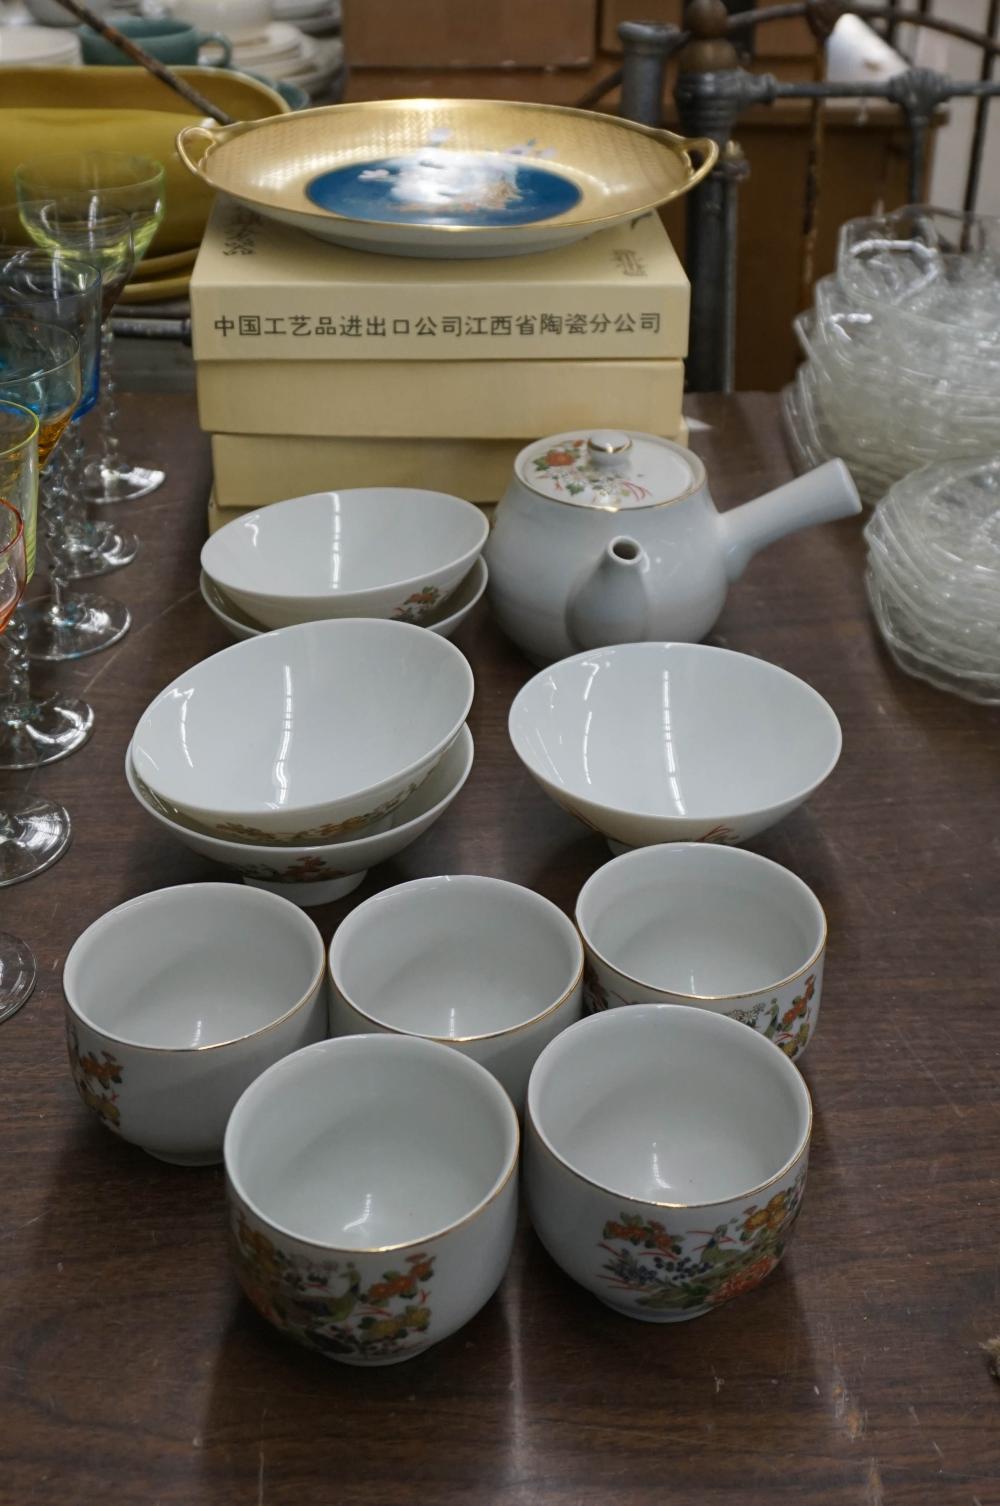 GROUP OF CHINESE PORCELAIN TEACUPS  3b2376